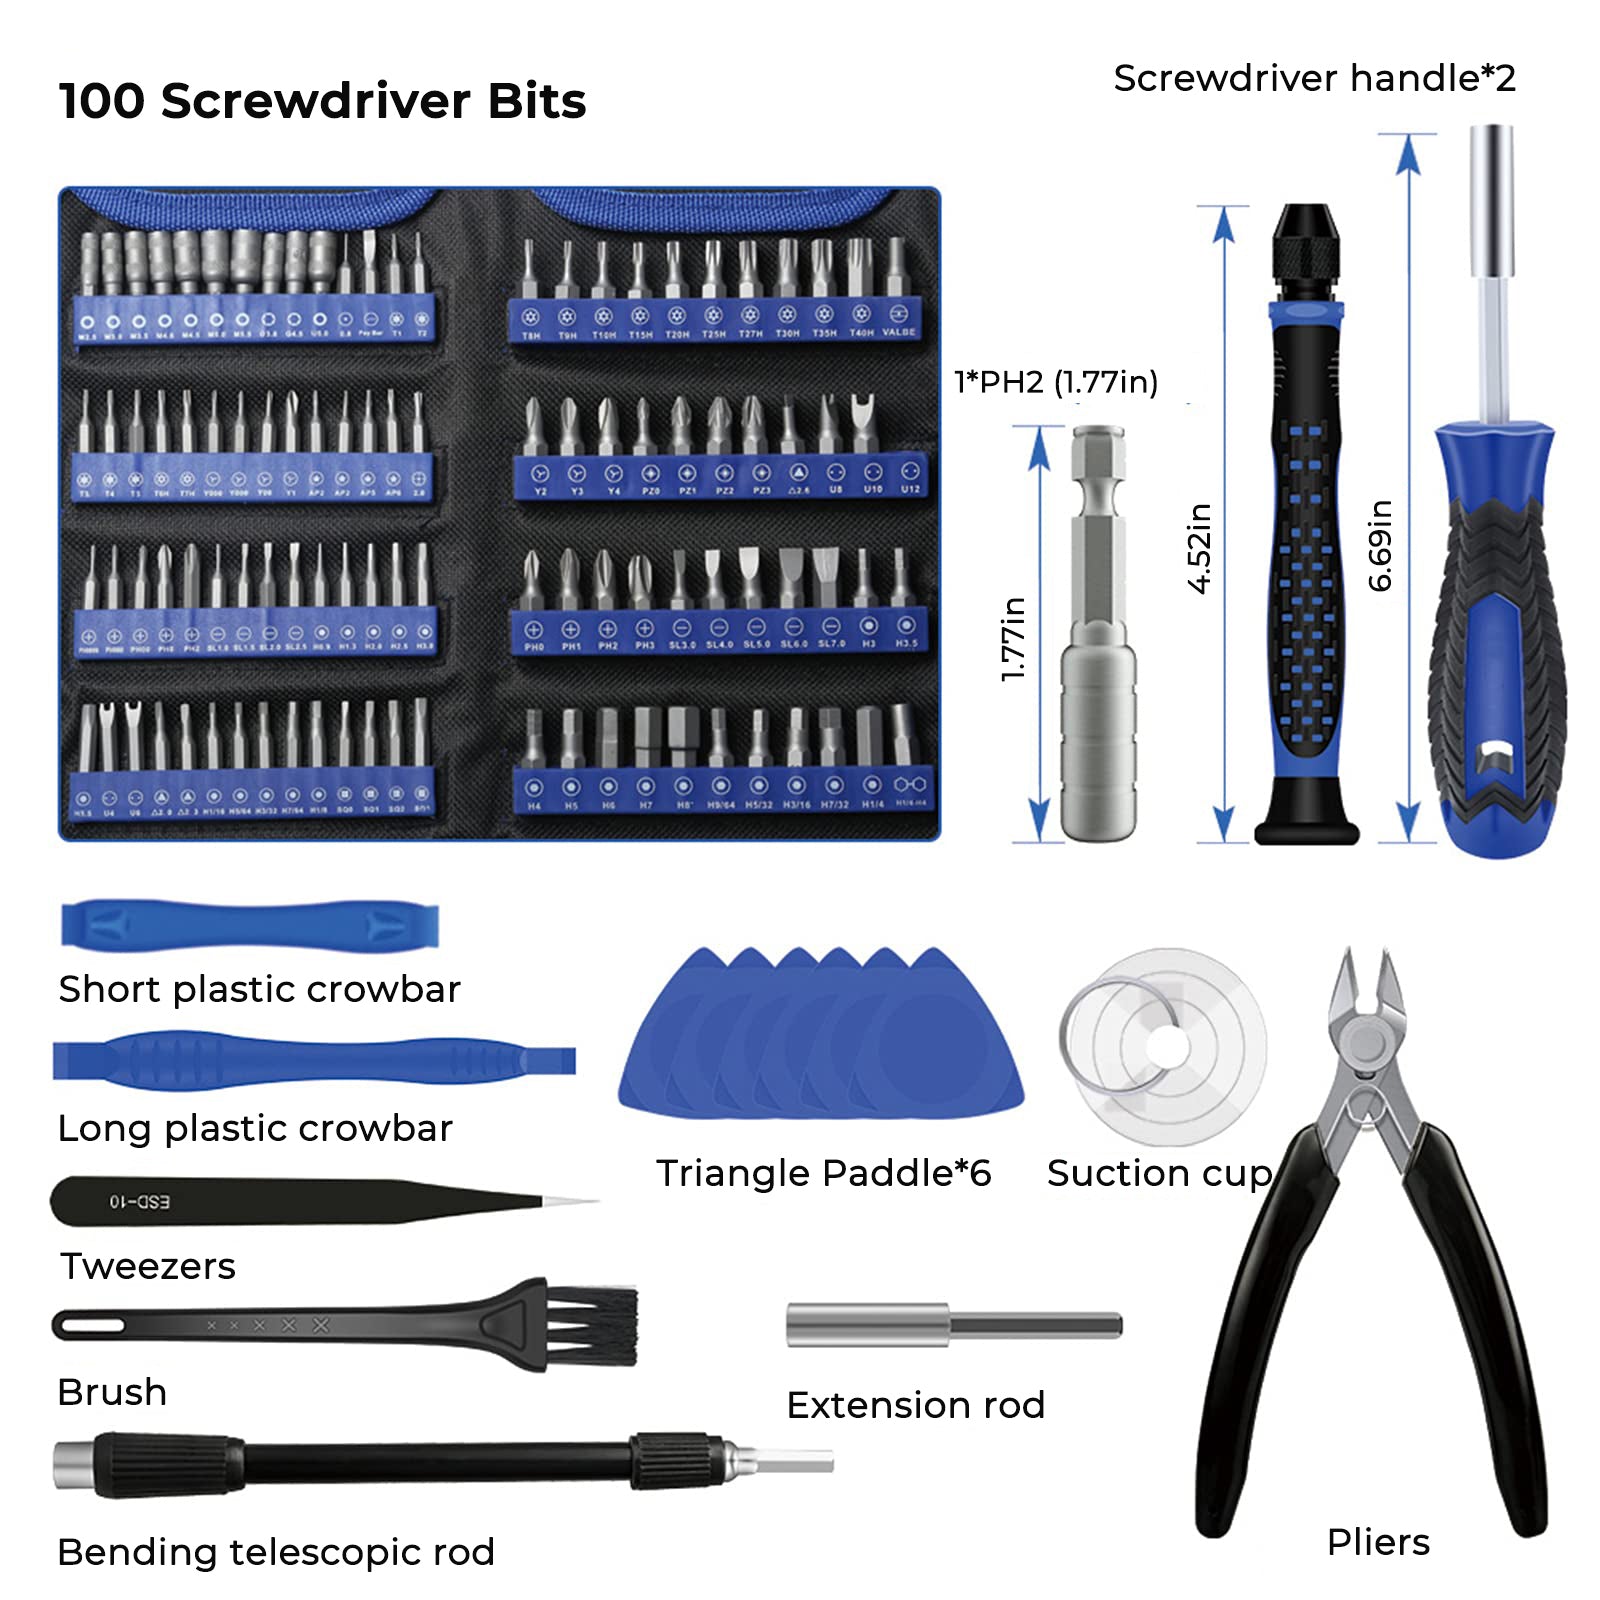 118pcs Multi Function Screwdriver Set for Electronic Product Repair and Household Use